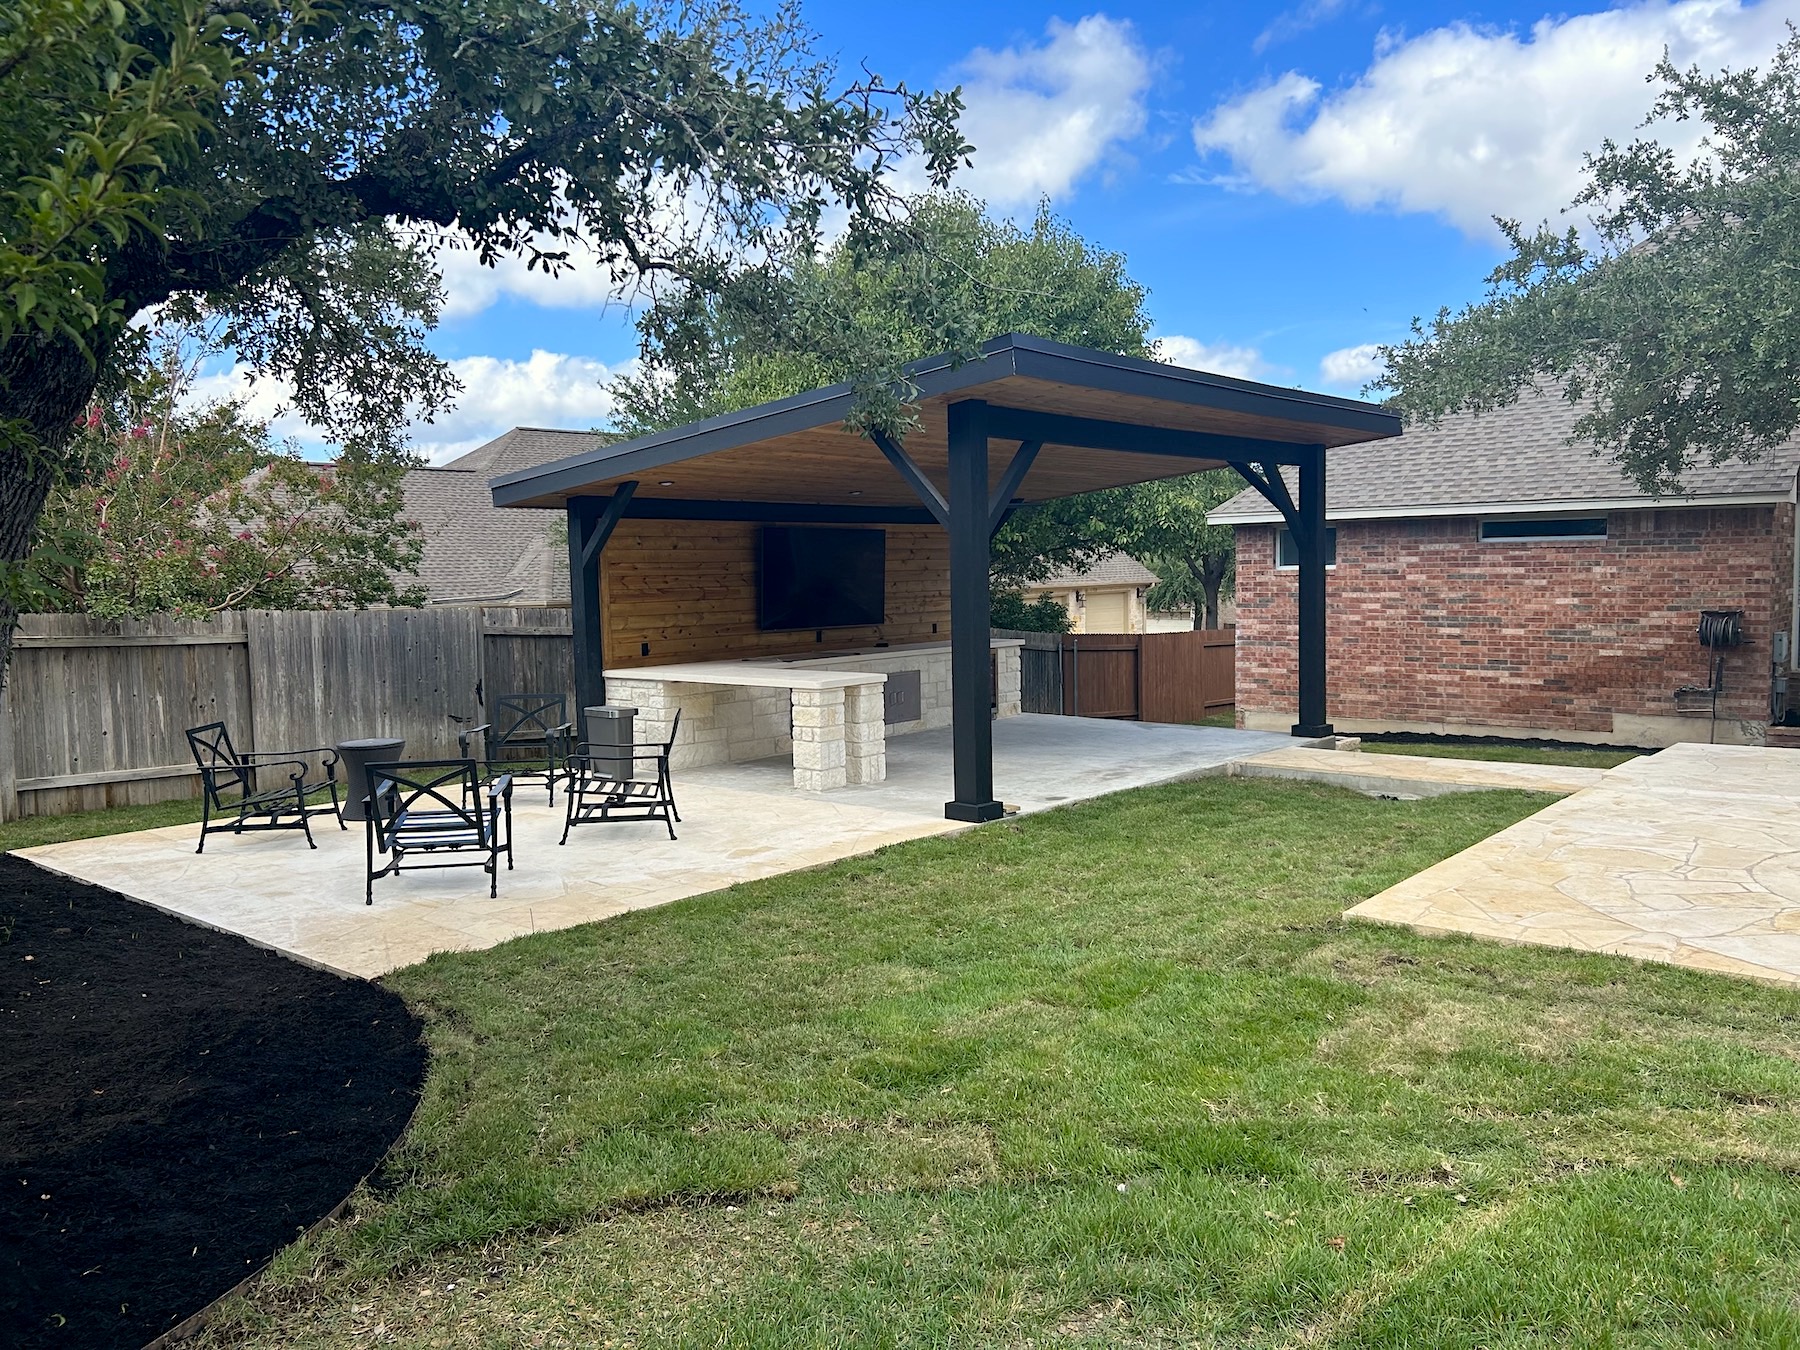 backyard patio with shade cover with an outdoor kitchen of white rock, bar top, and outdoor tv